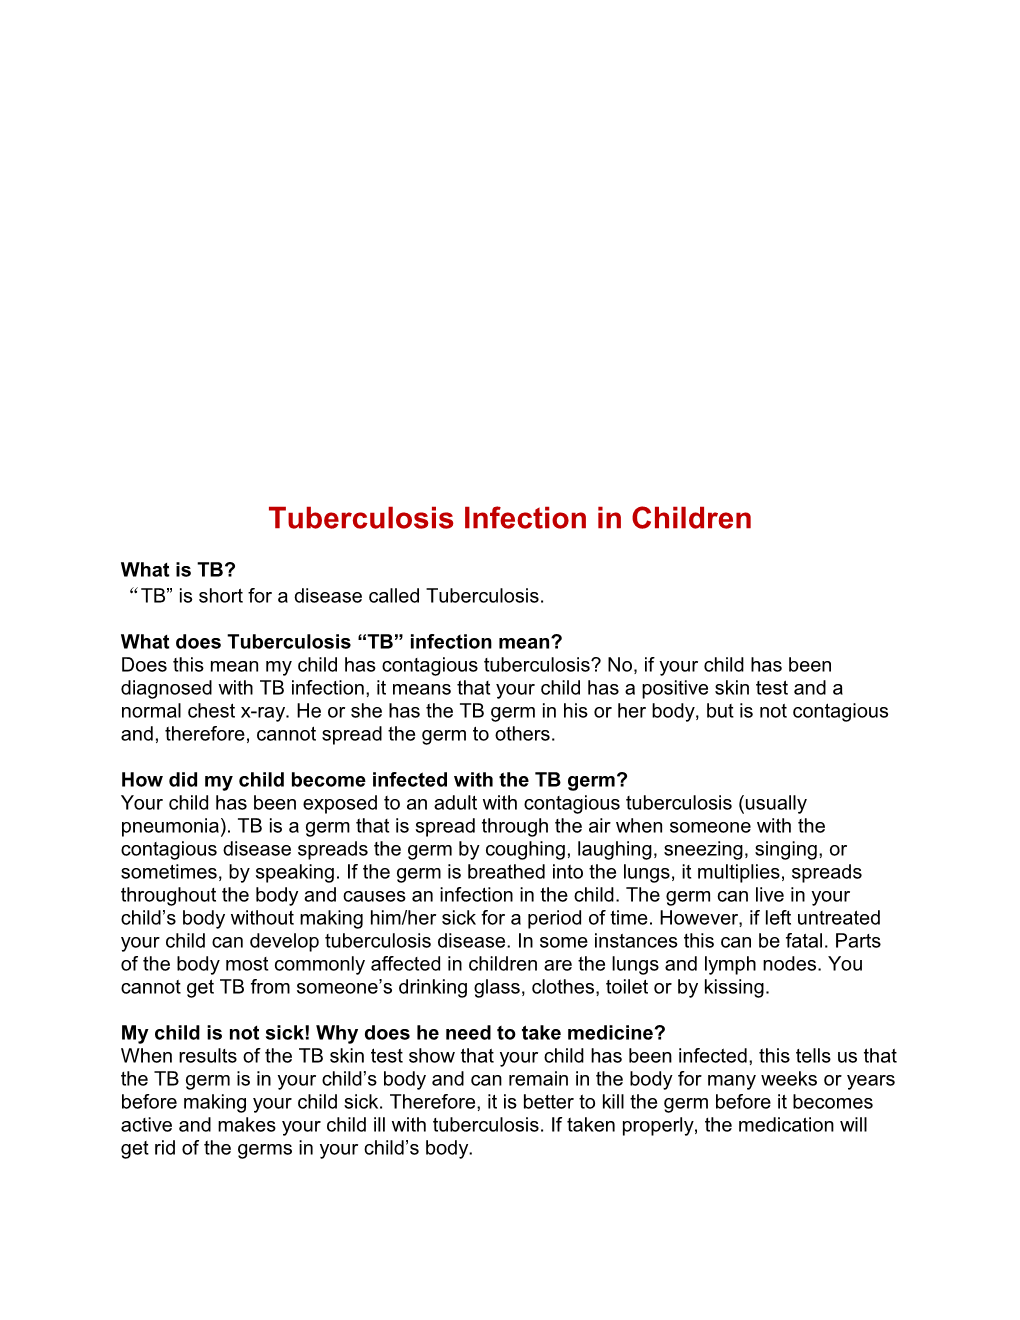 What Does Tuberculosis TB Infection Mean?